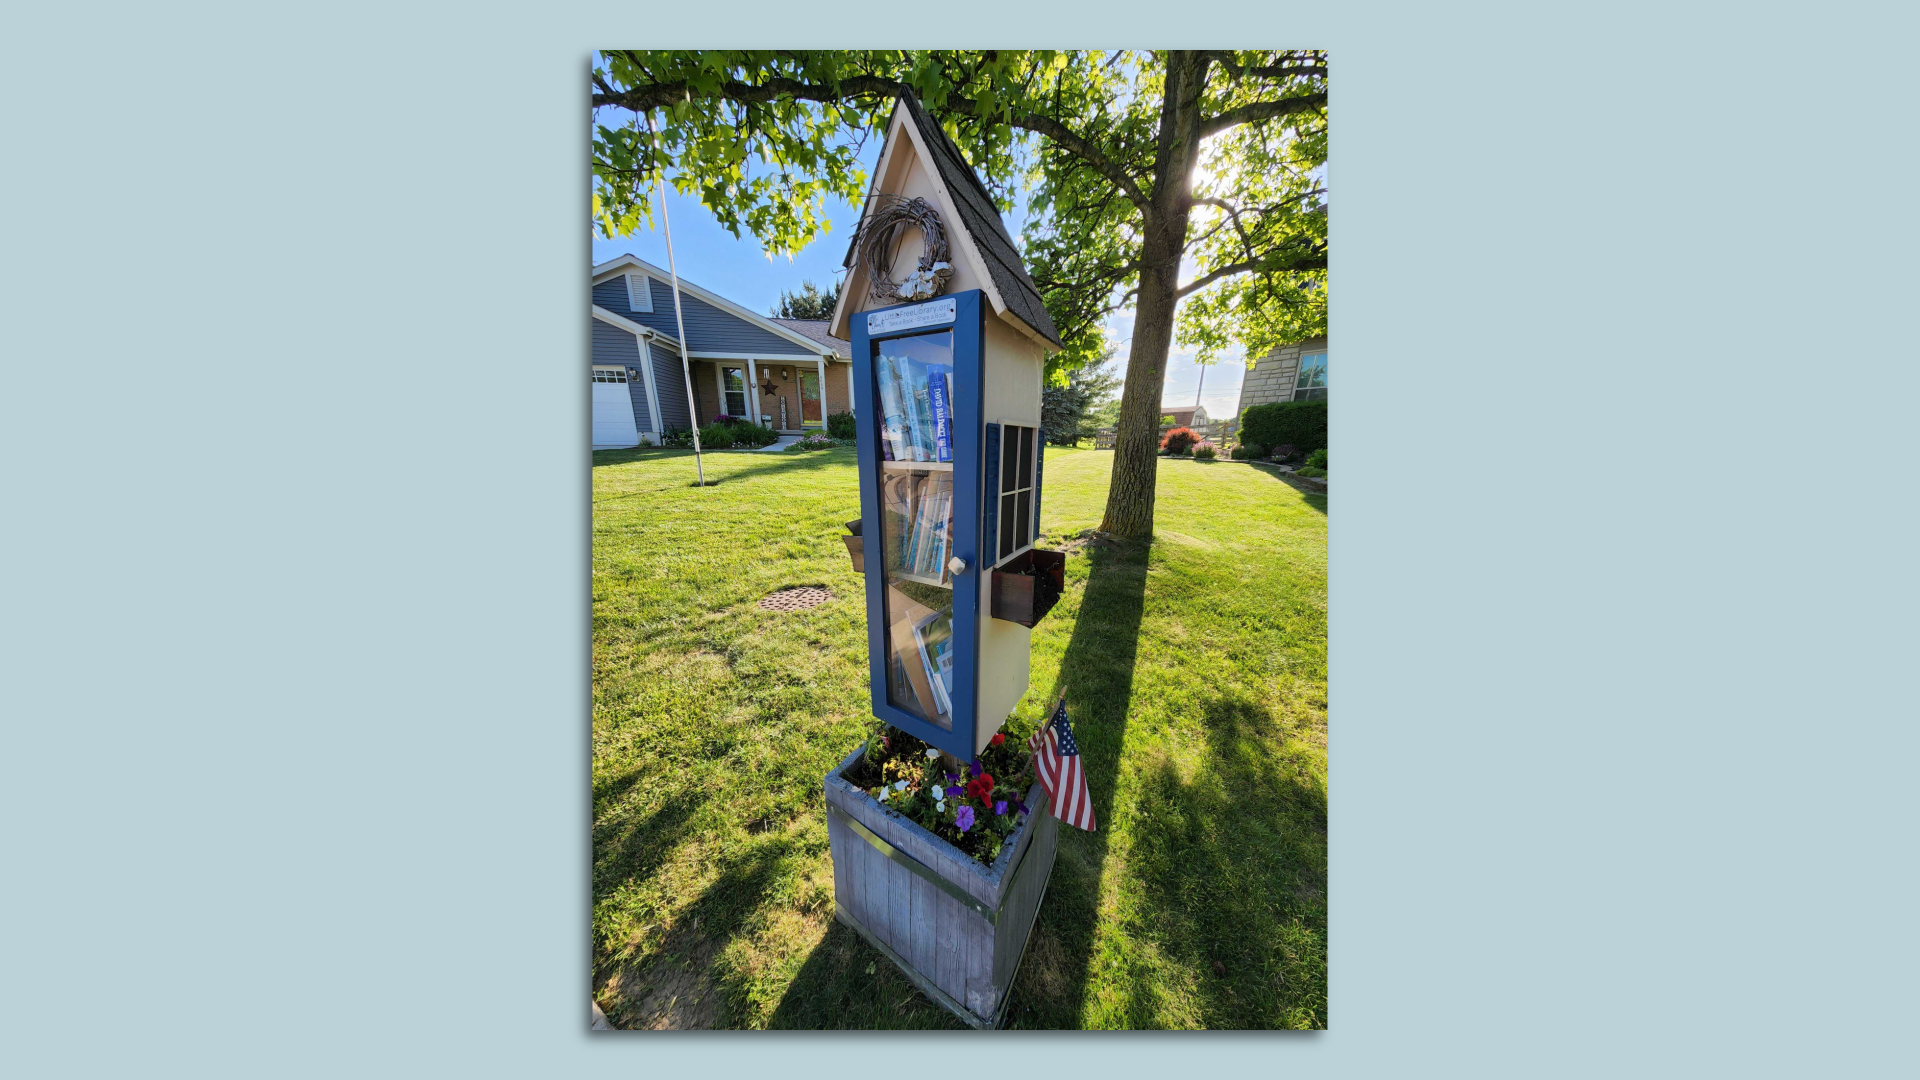 A "Little Free Library" in a front yard.